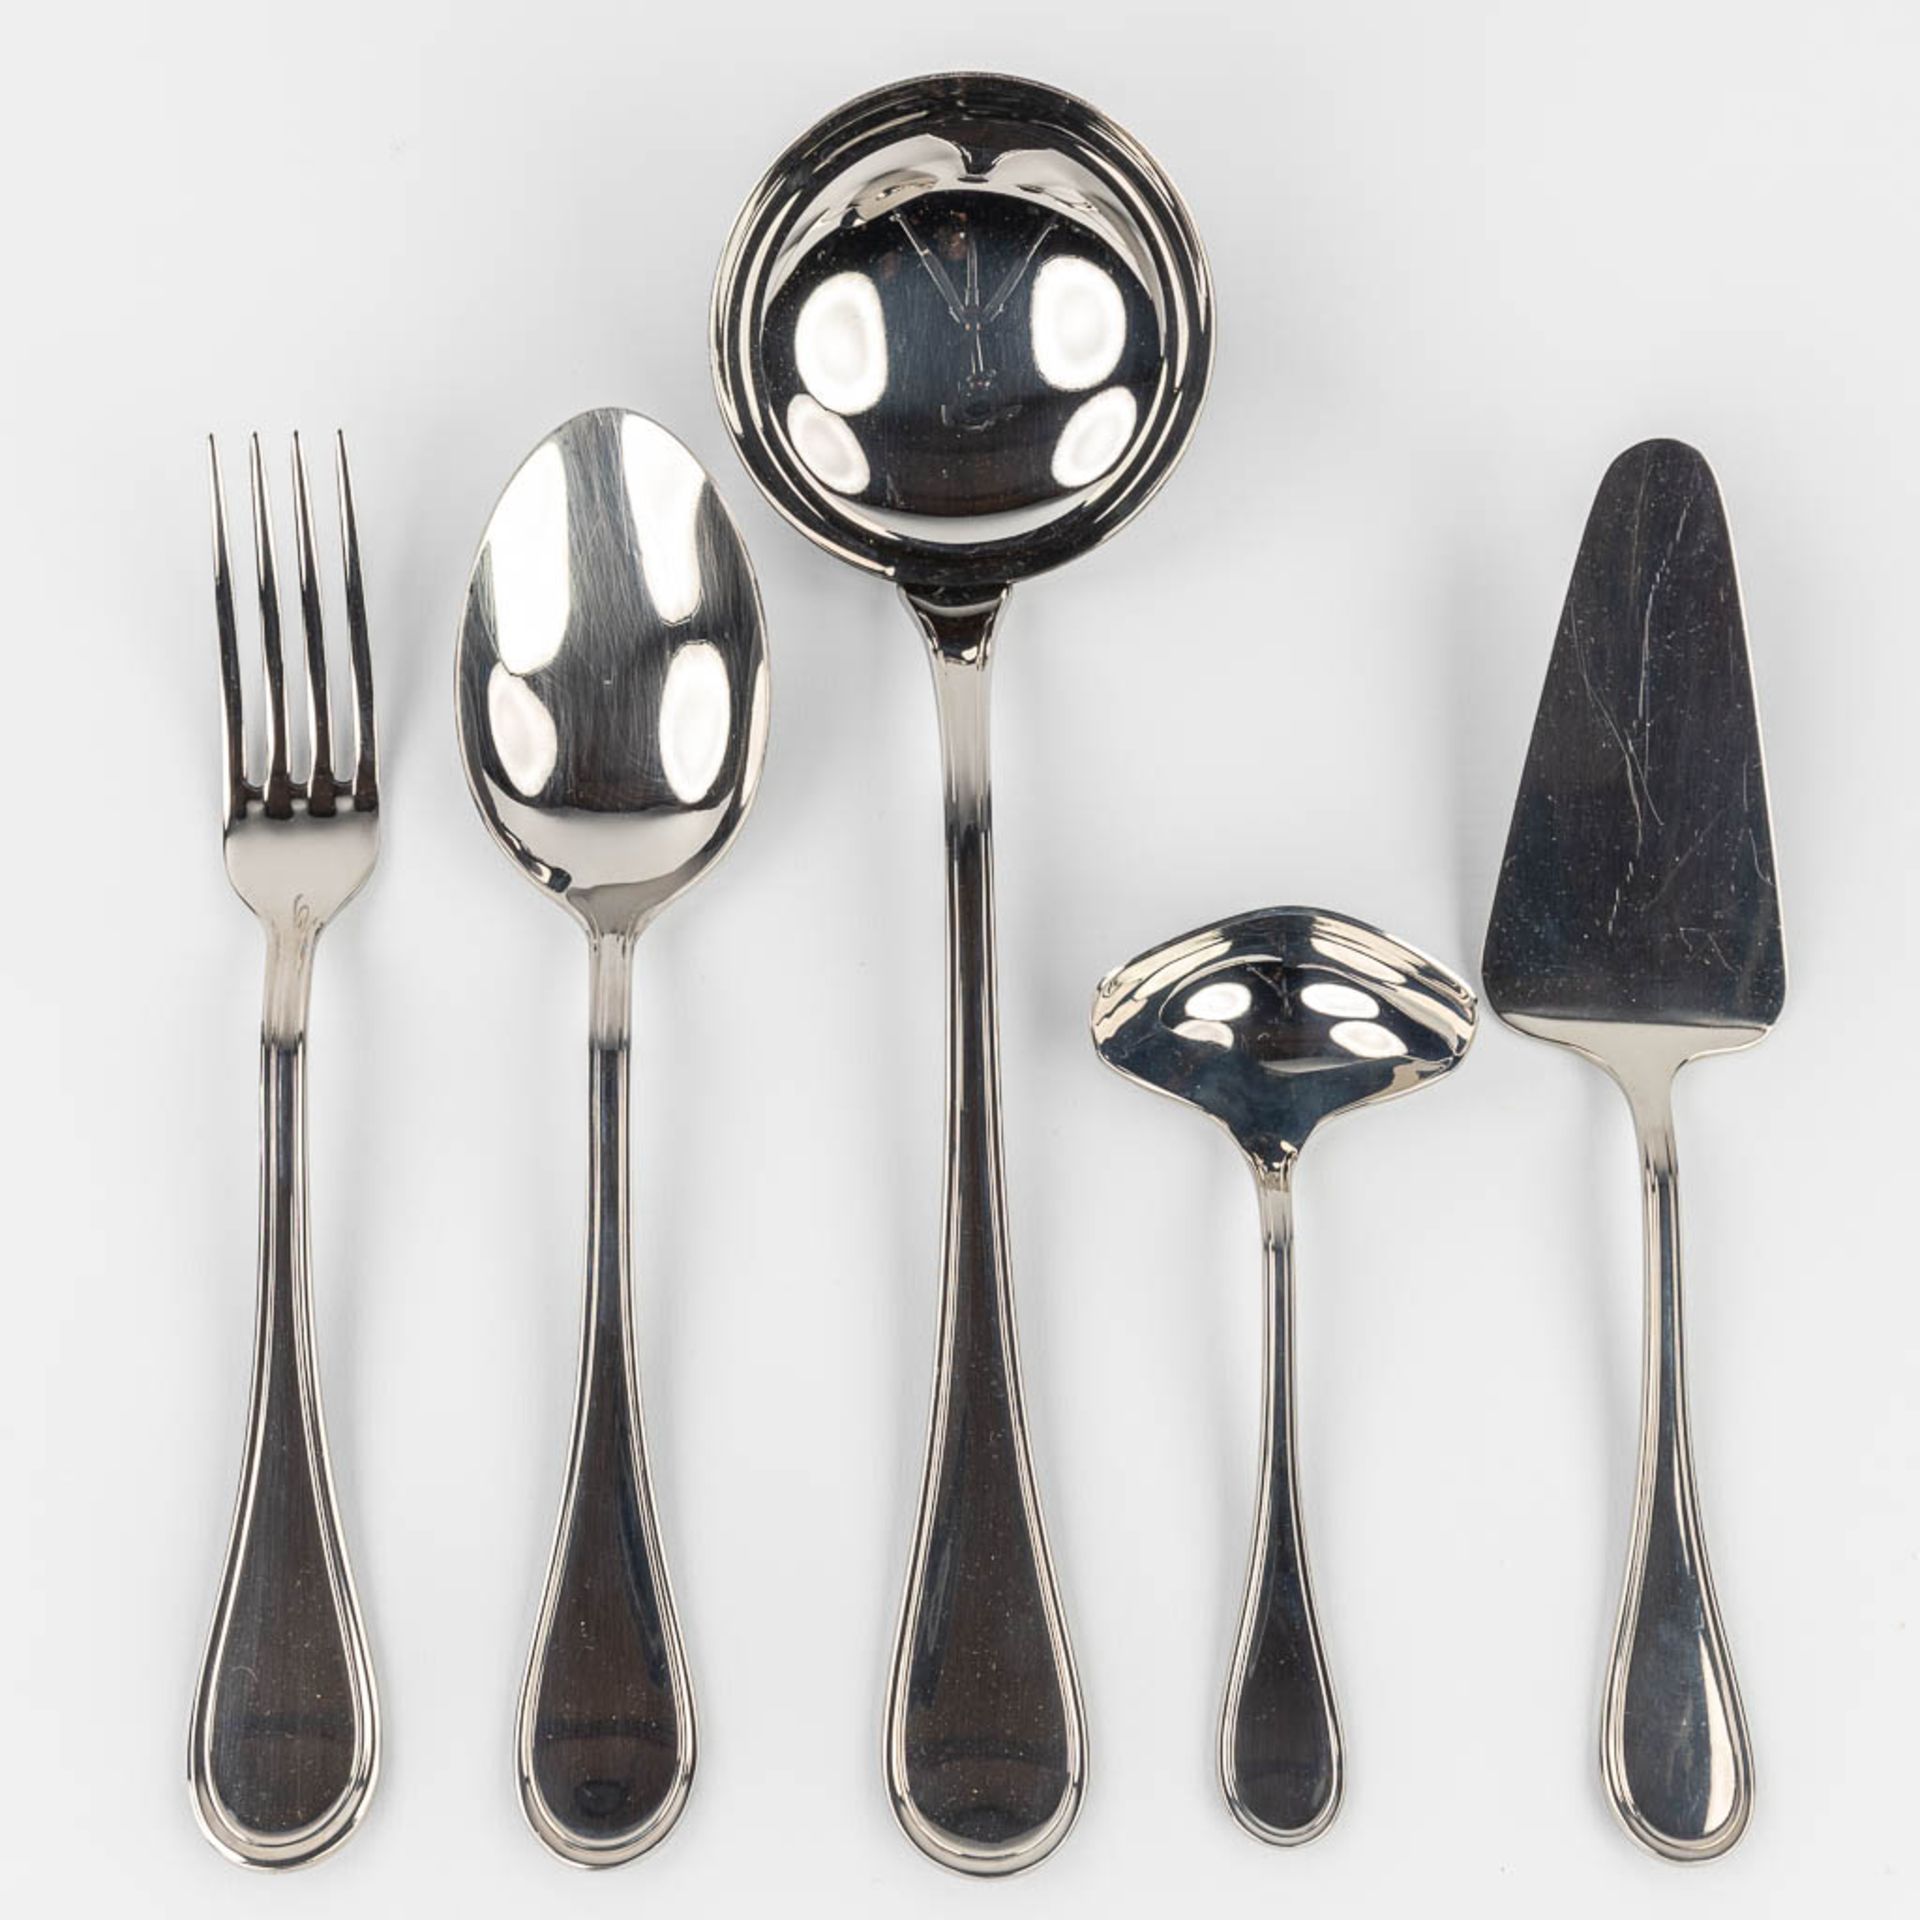 Christofle, model 'Albi' in an 'ambassador 125' case, a 124-piece flatware set, stainless steel. (L - Image 5 of 12